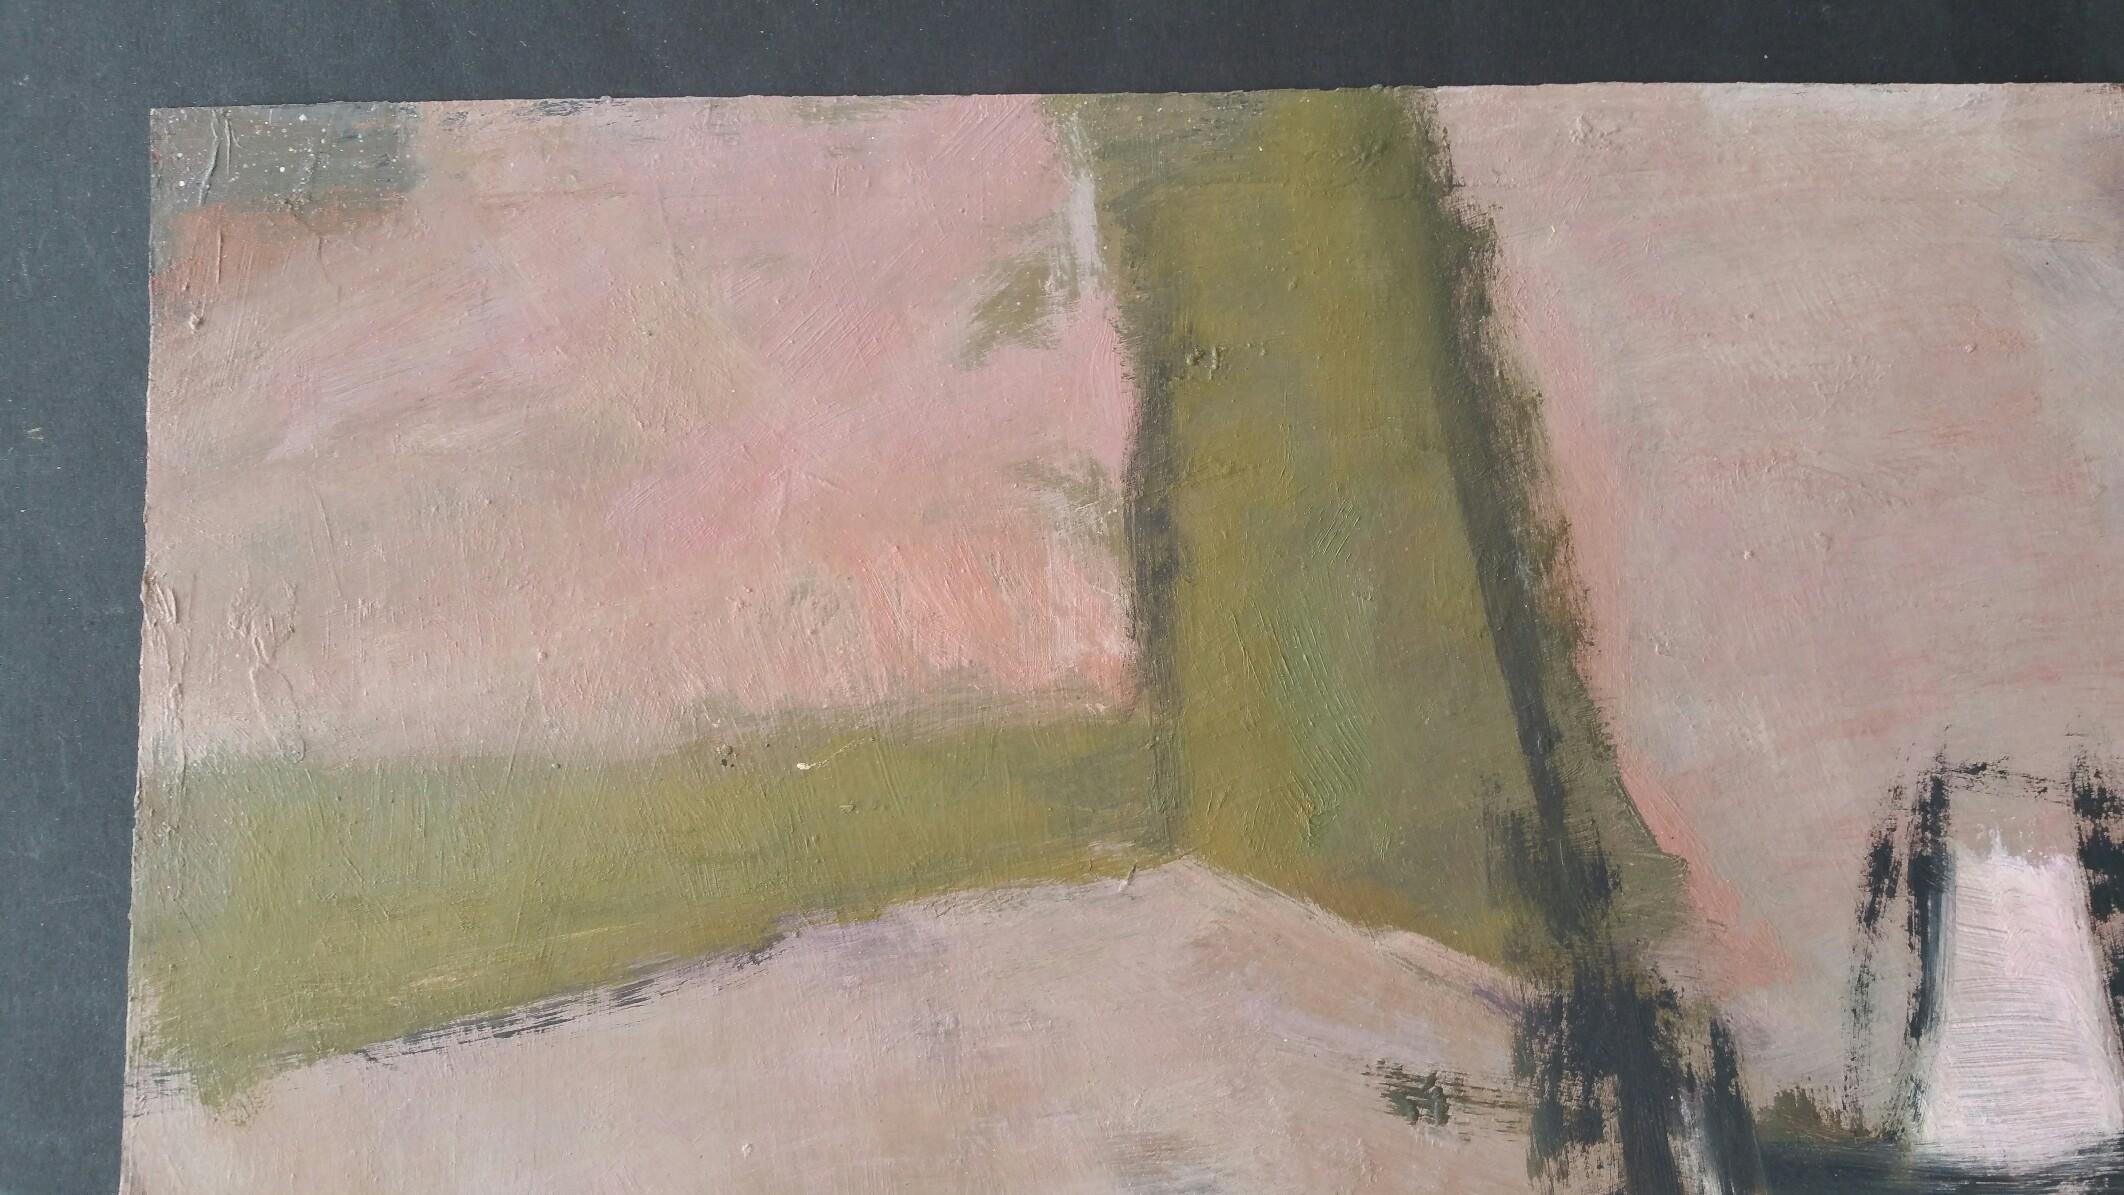 Parisian Abstract Expressionist Original Oil Painting - Pinks, Greens, Charcoal For Sale 1